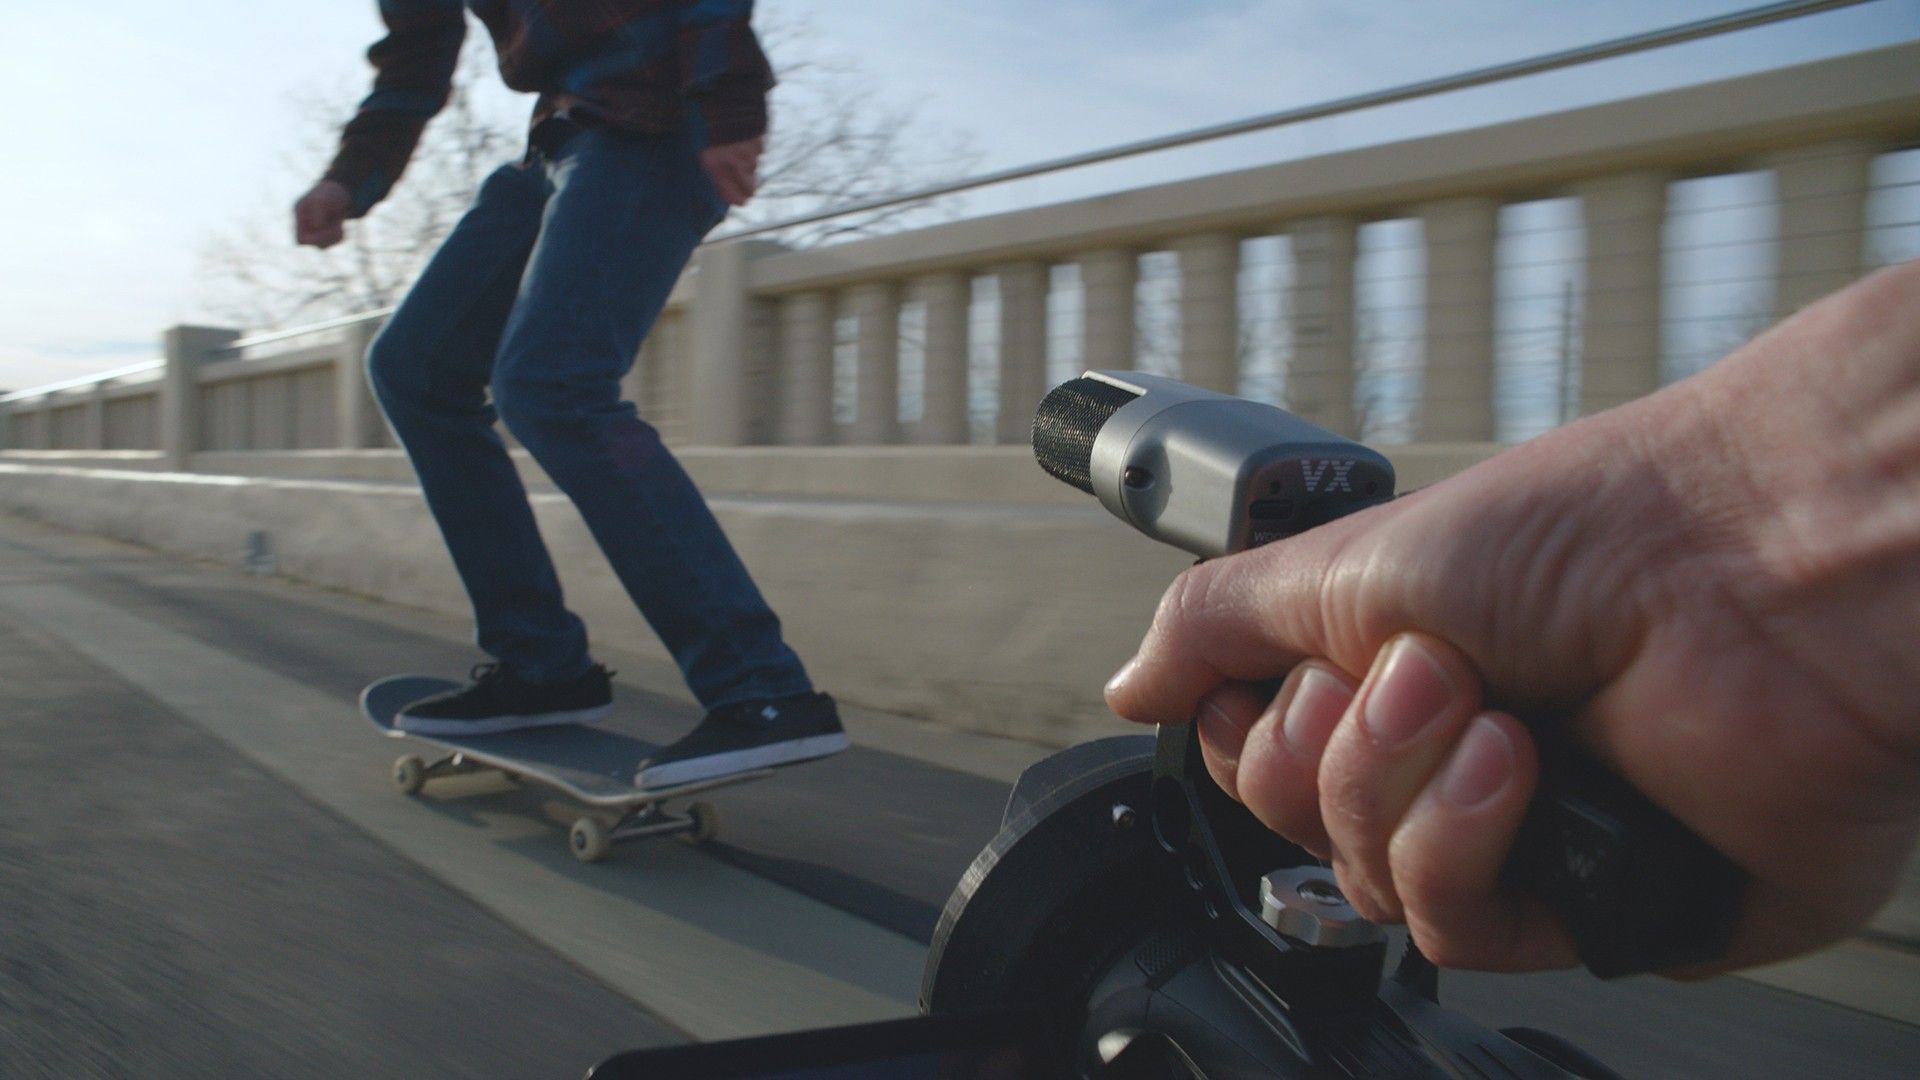 90s Skateboarding Culture Lives on with new Wooden Camera VX Mic